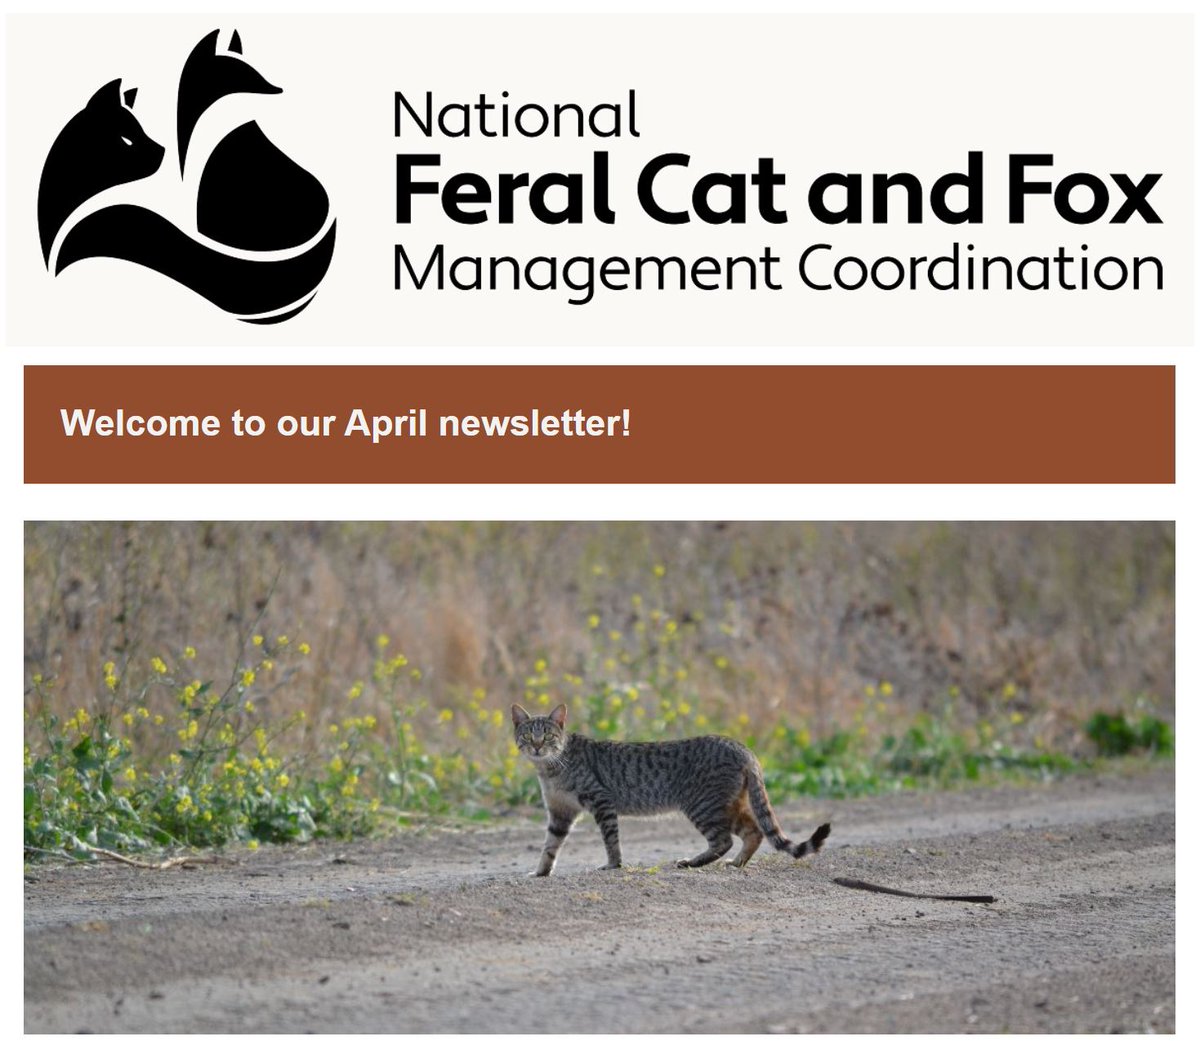 Pounce on our April issue for an in-depth look at the awesome Minjerribah (North Stradbroke Island) Fox and Cat Control Project. loom.ly/iqyhJbU